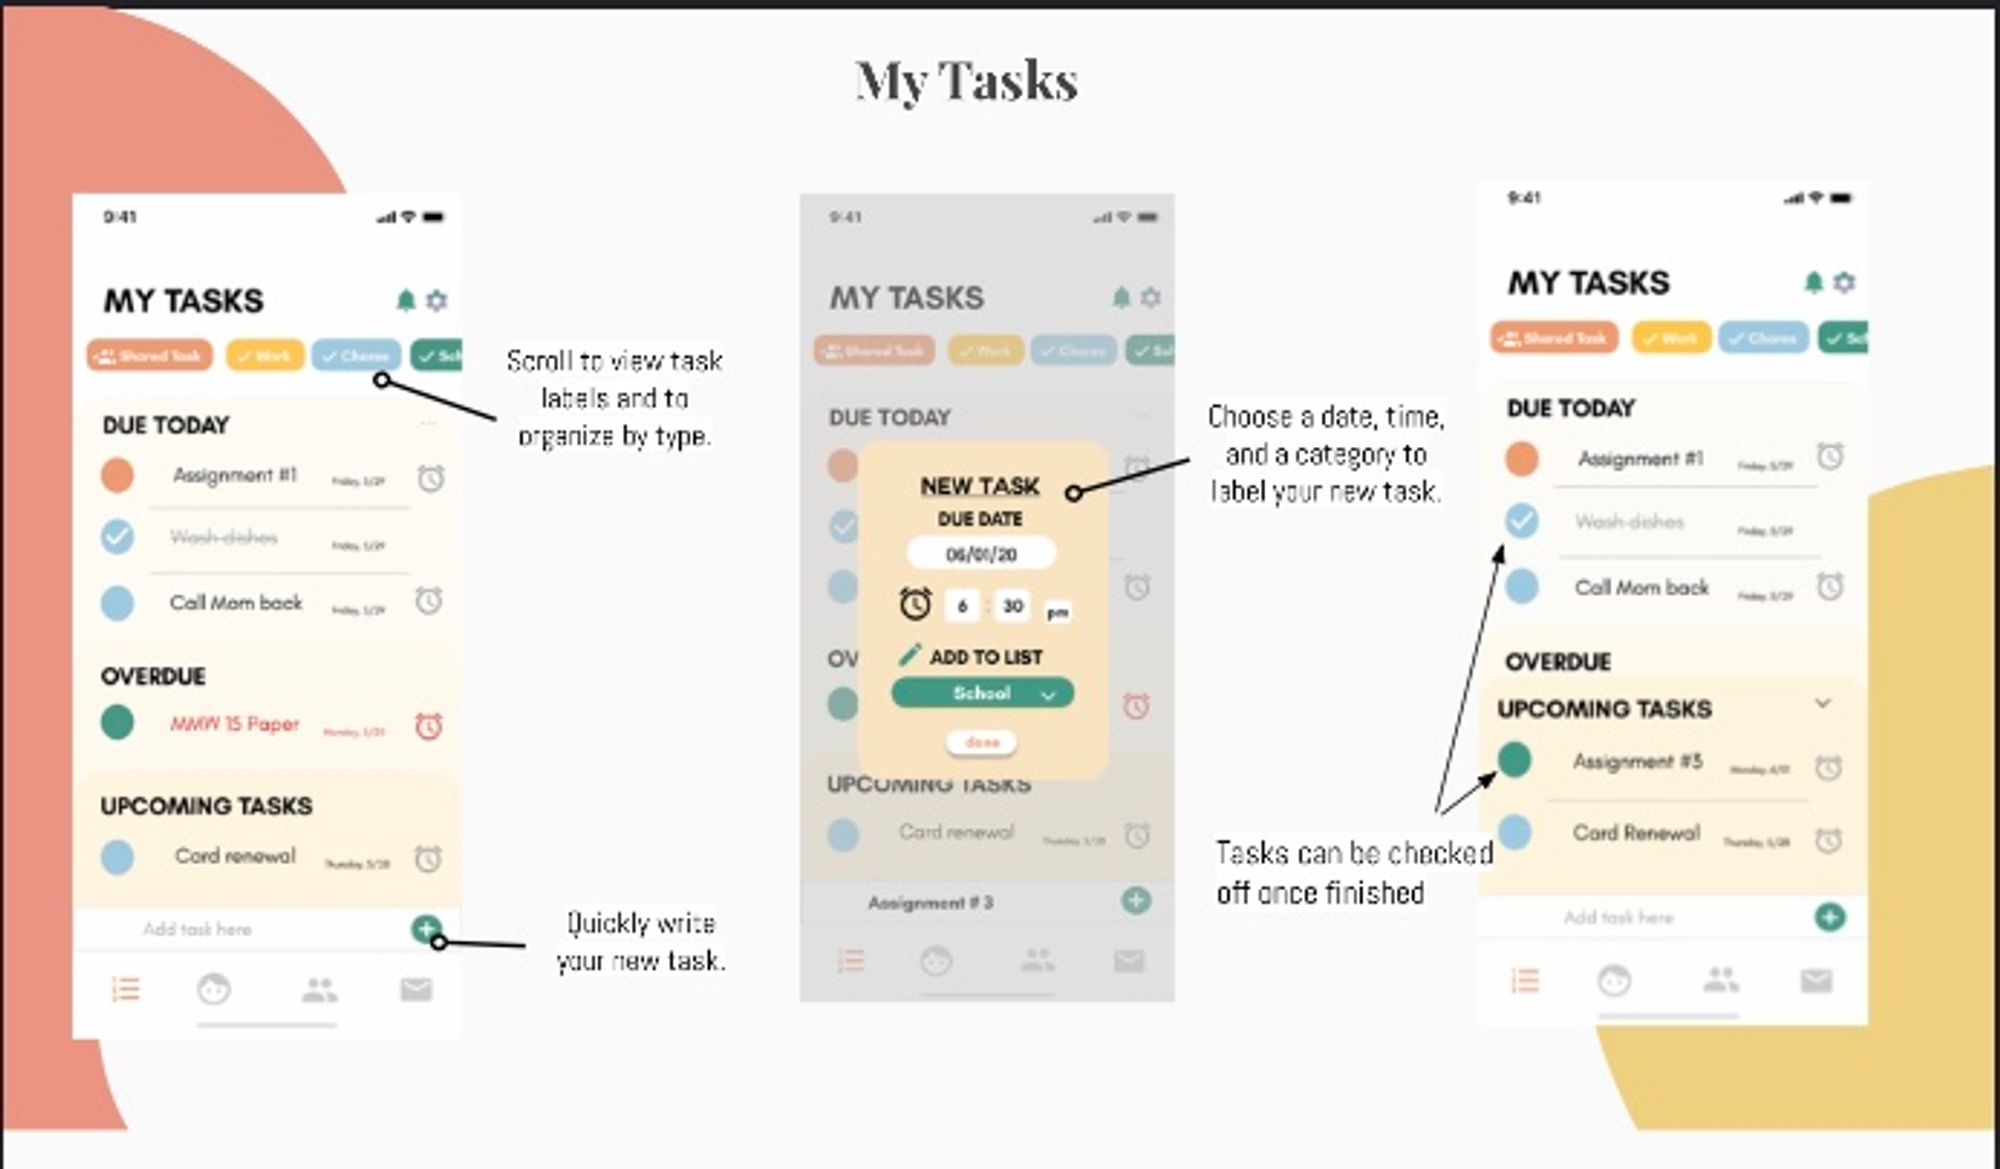 Rutina allows users to add and view tasks while being able to track due dates.